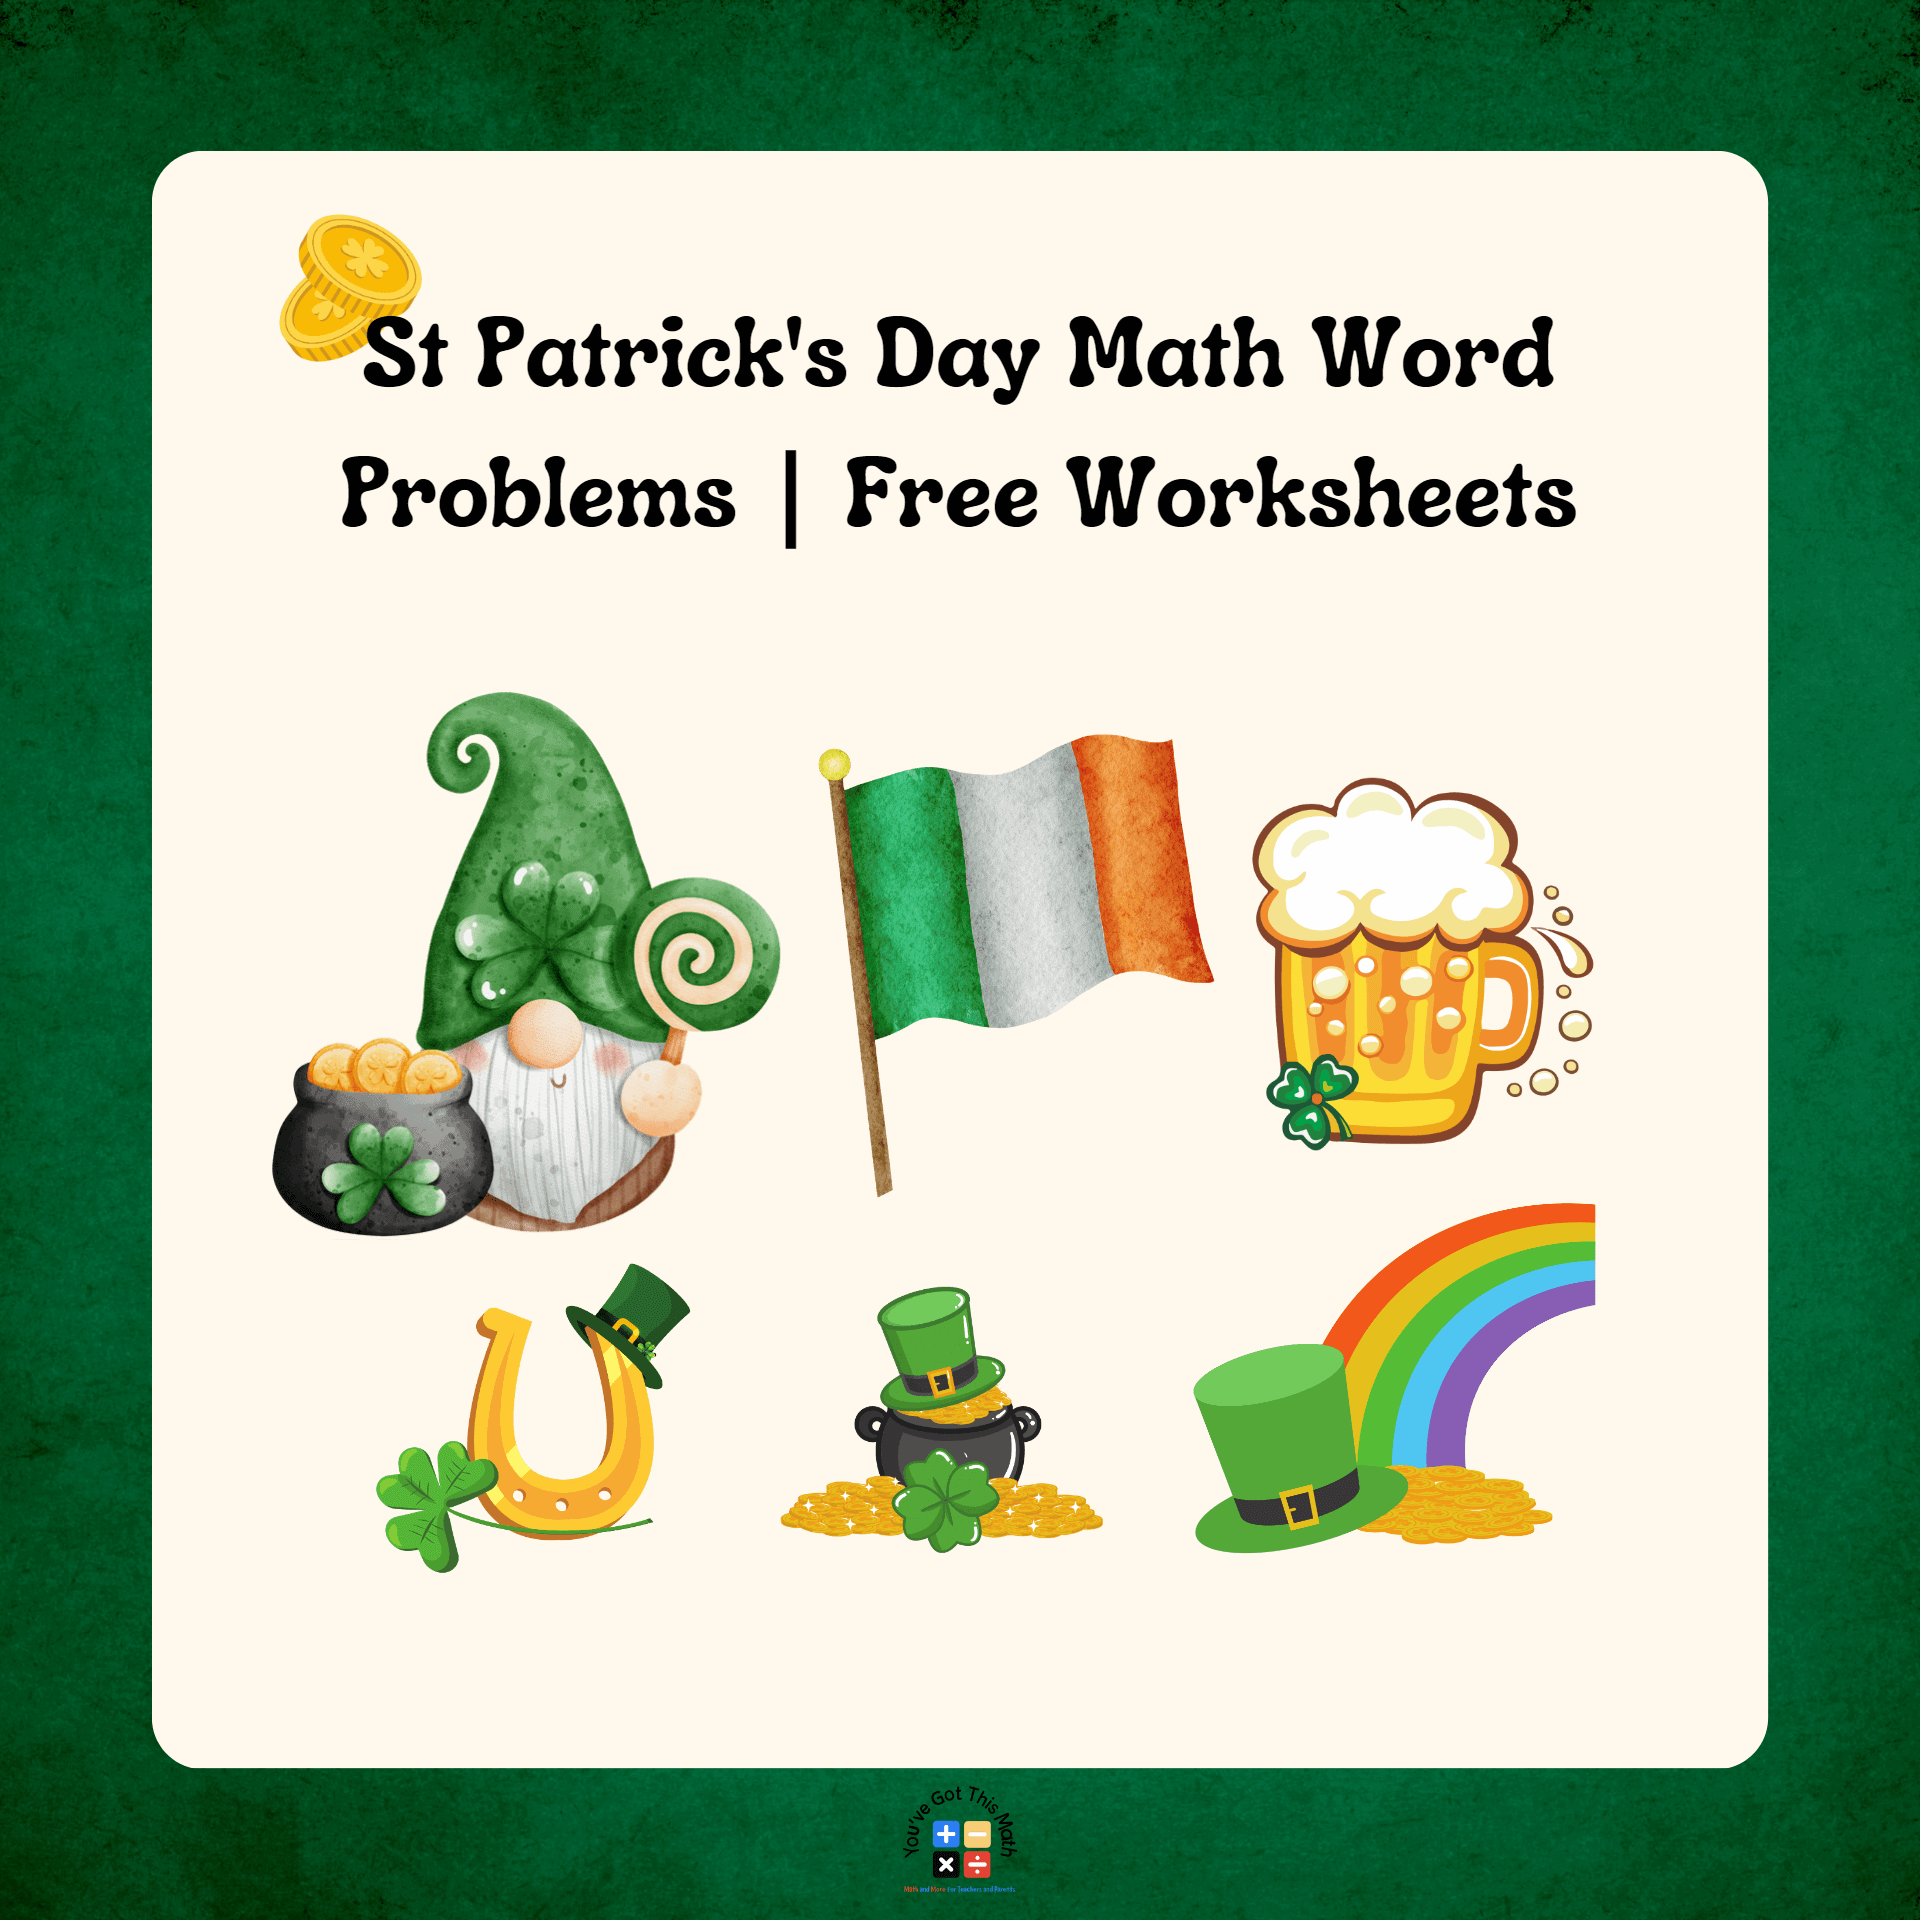 St. Patrick's Day Math Word Problems Overview